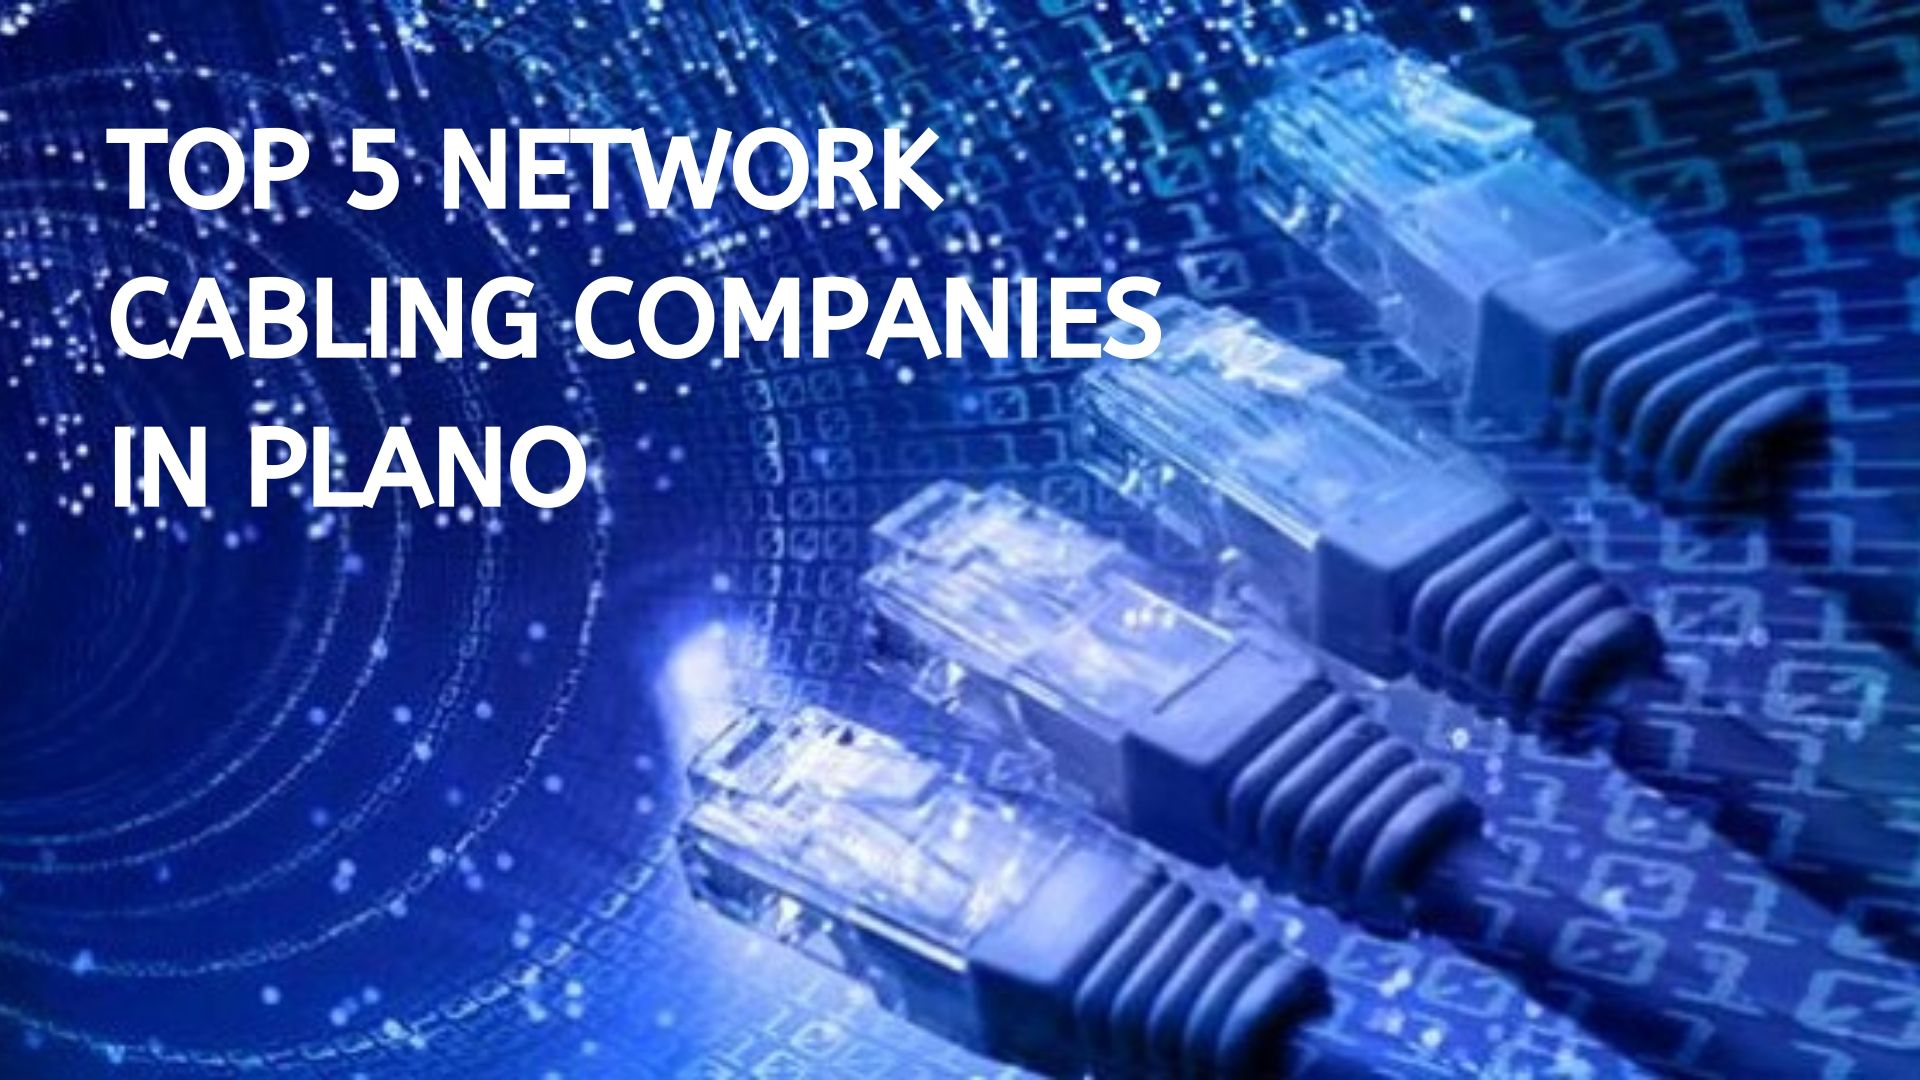 Top 5 Network Cabling Companies in Plano